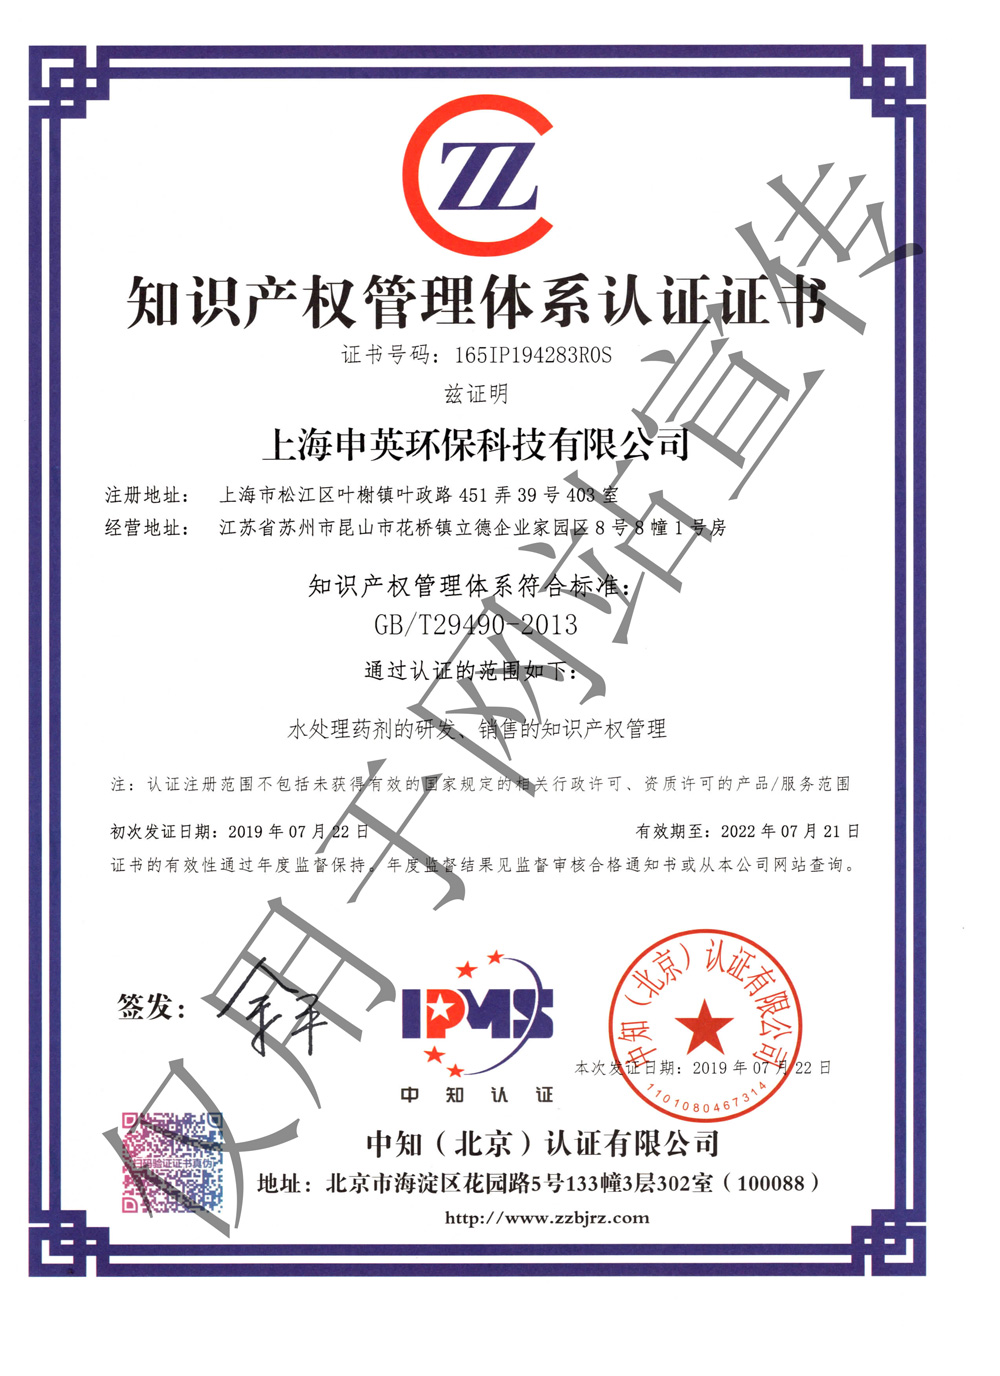 SS-SY-Intellectual Property Management Certificate